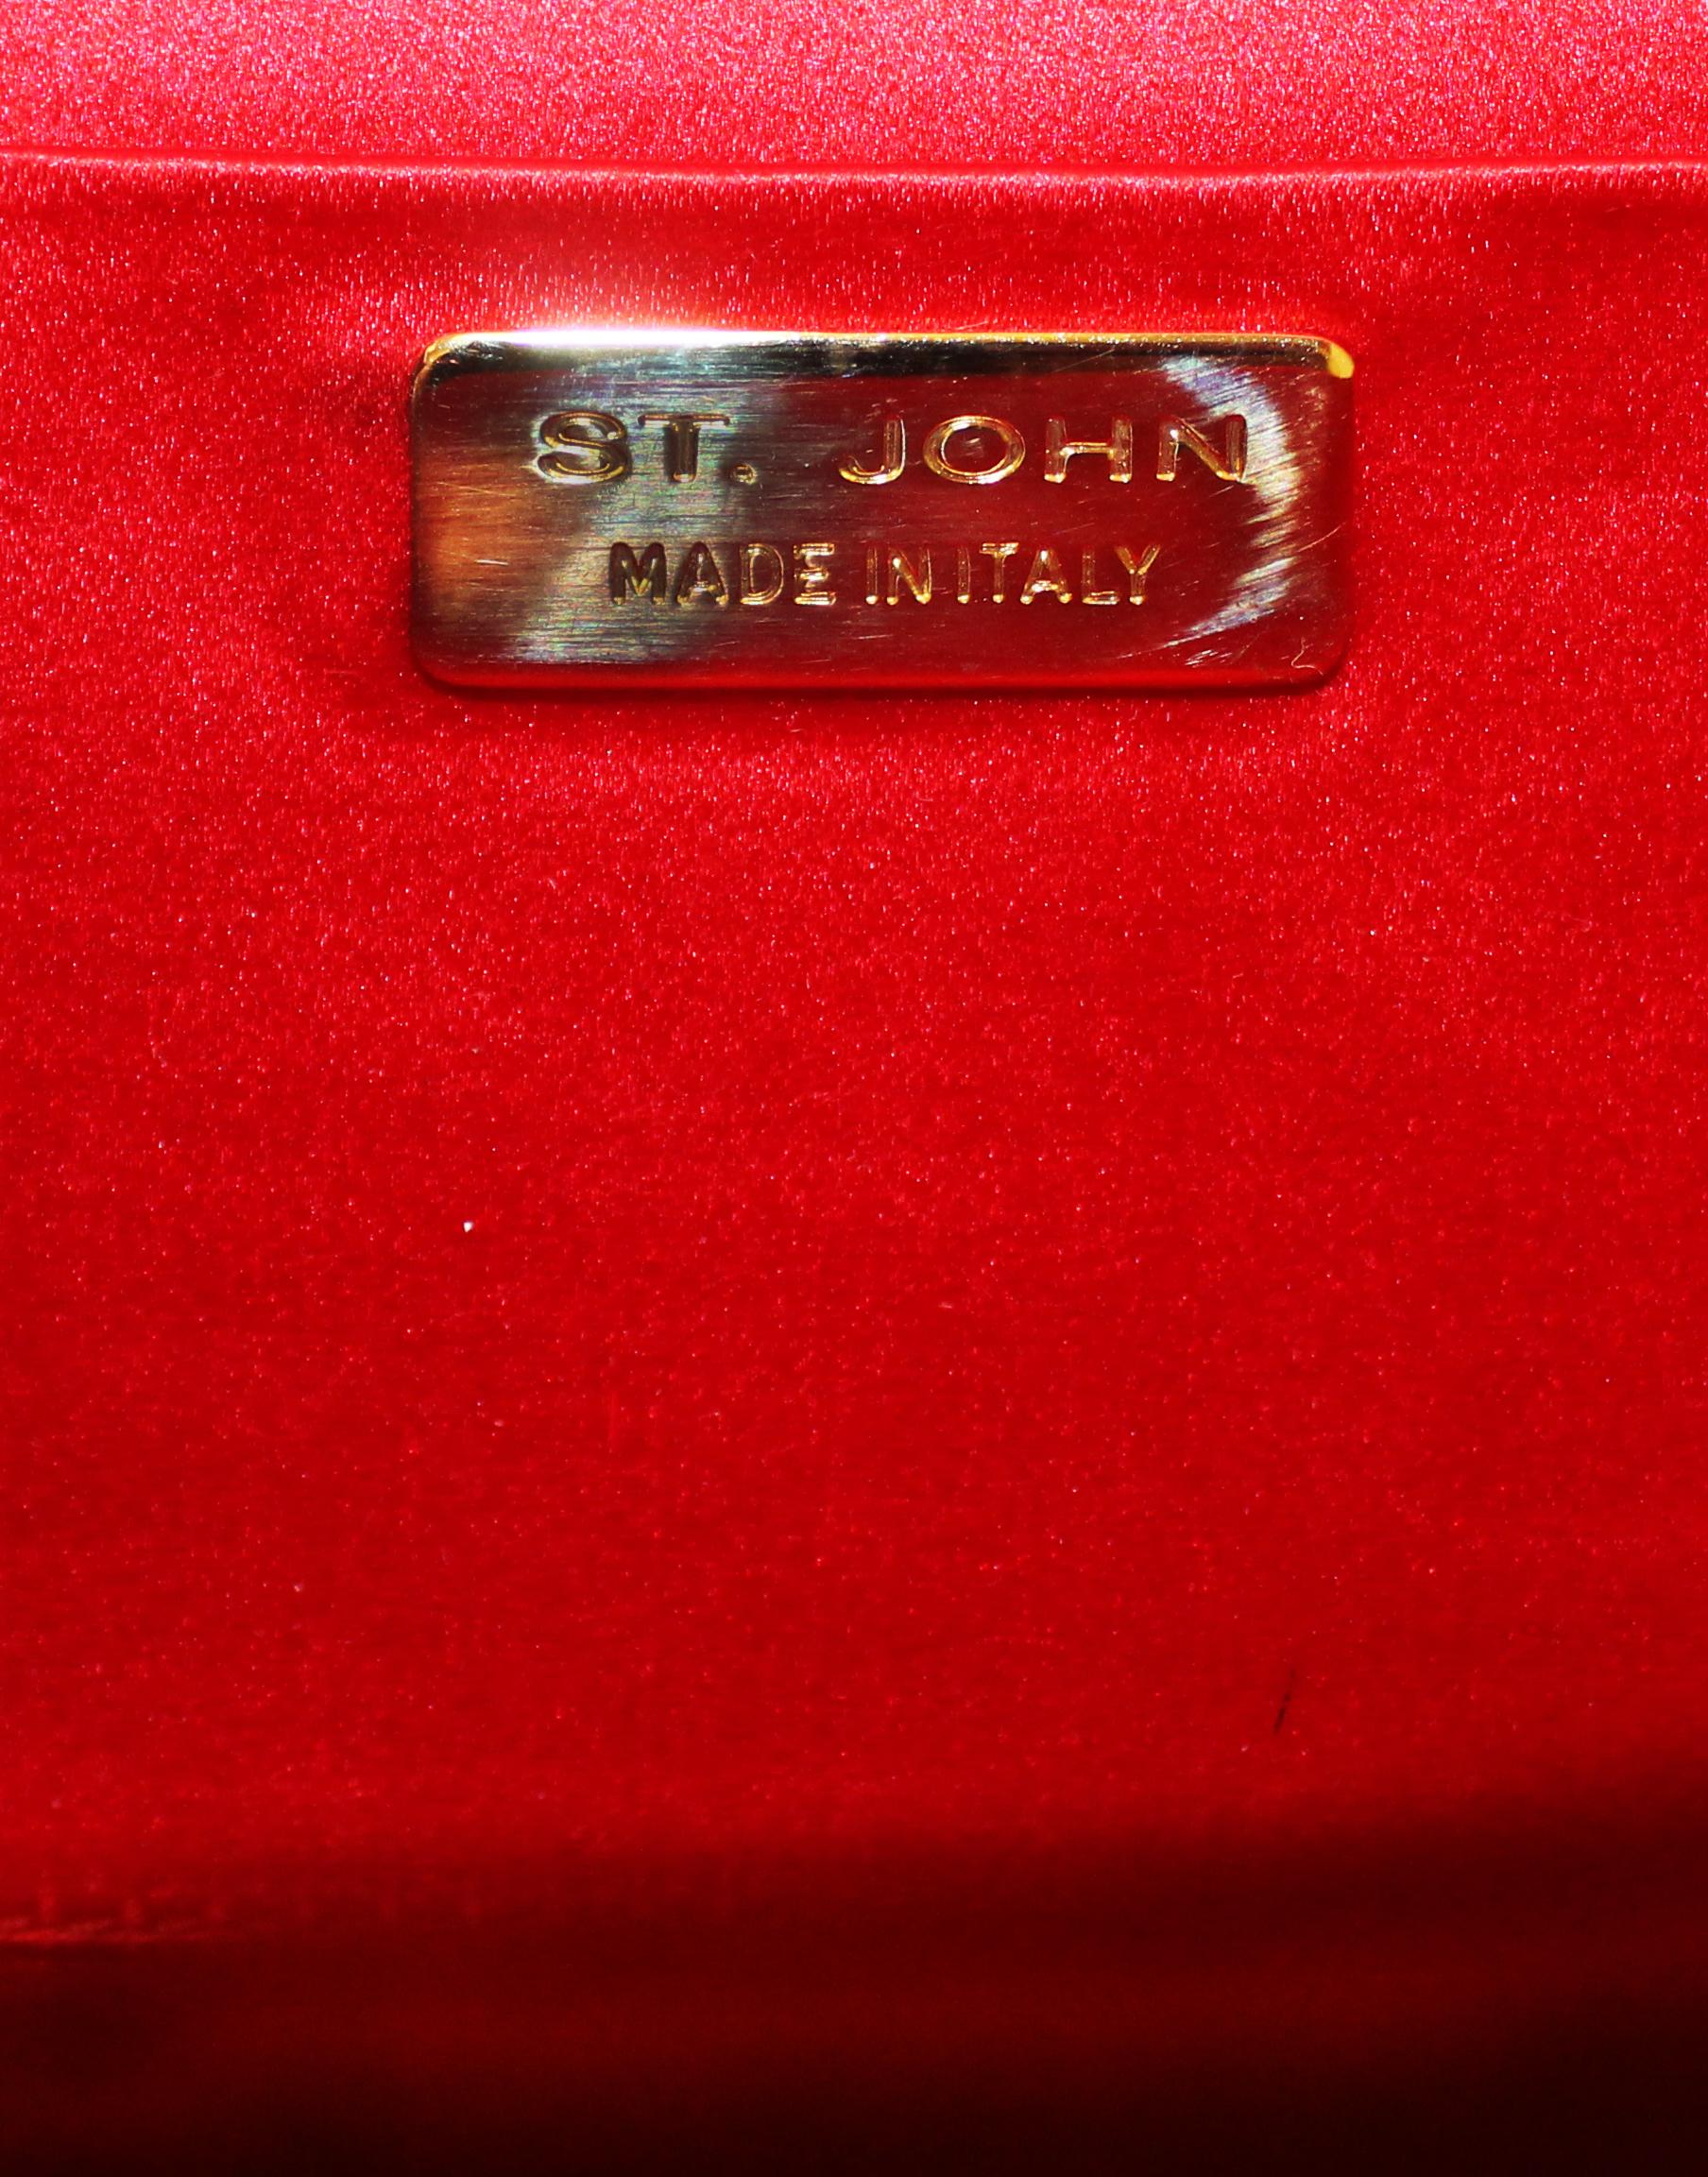 St John Red Sequined Satin Clutch W/ Crystal Buckle At Closure 1